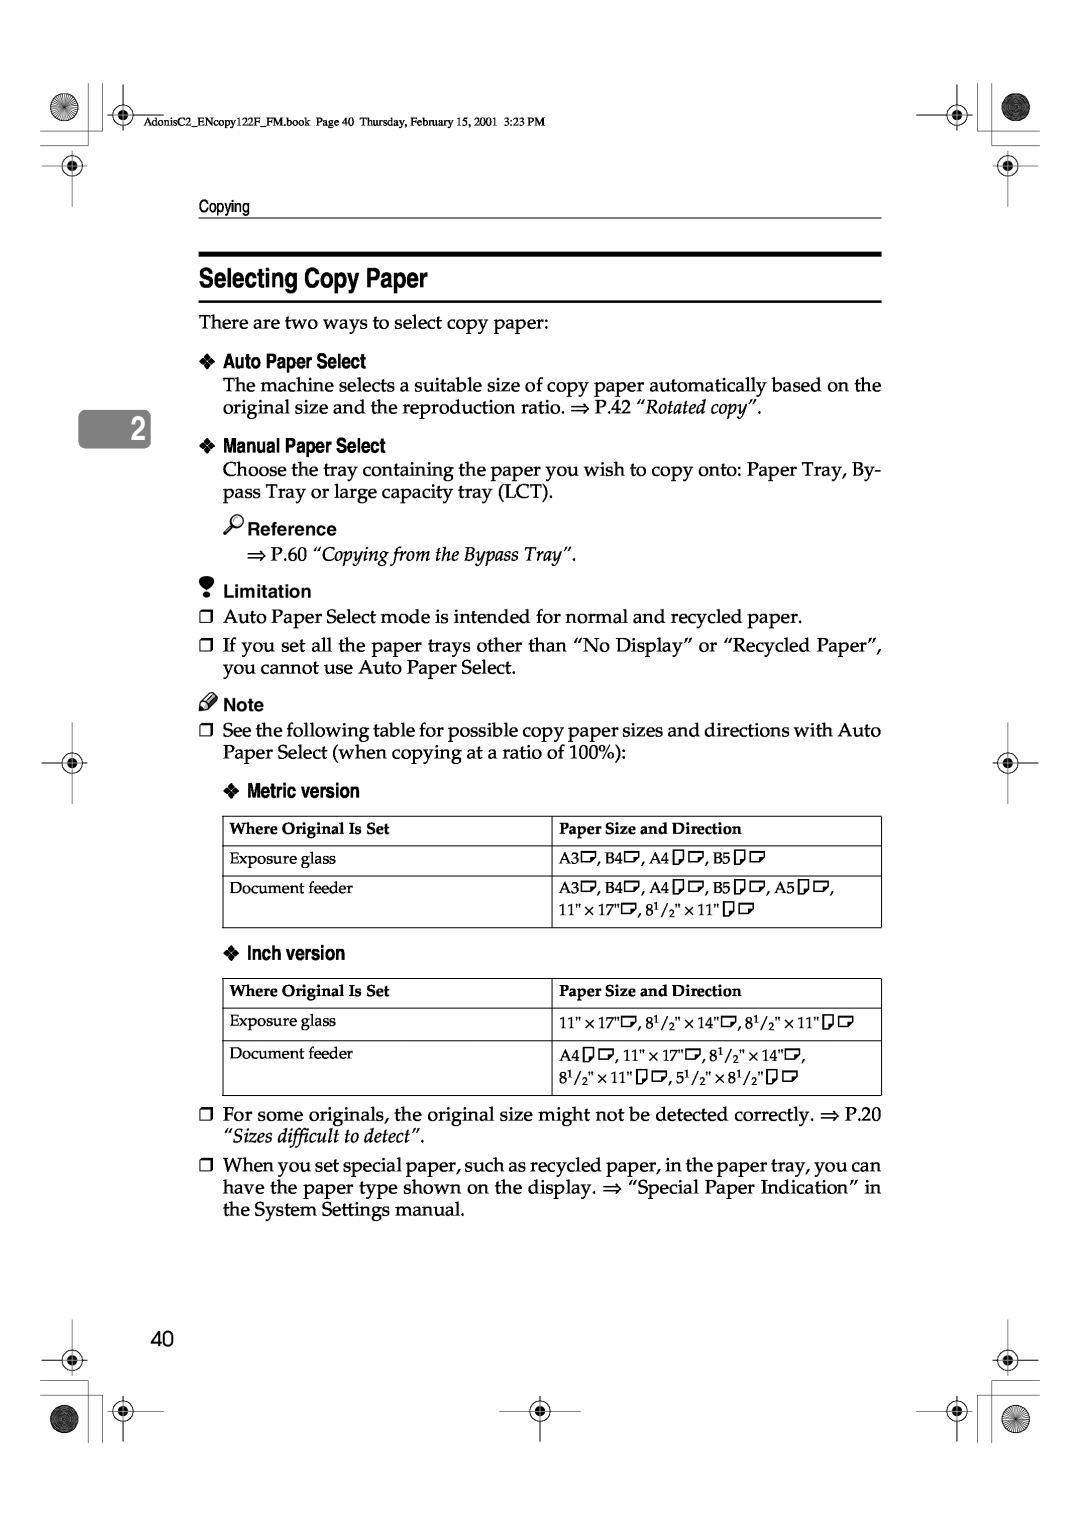 Savin 2535/2535p, 3502/3502p, 4502/4502p, 2235, 2545/2545p, 2245 Selecting Copy Paper, ⇒ P.60 “Copying from the Bypass Tray” 